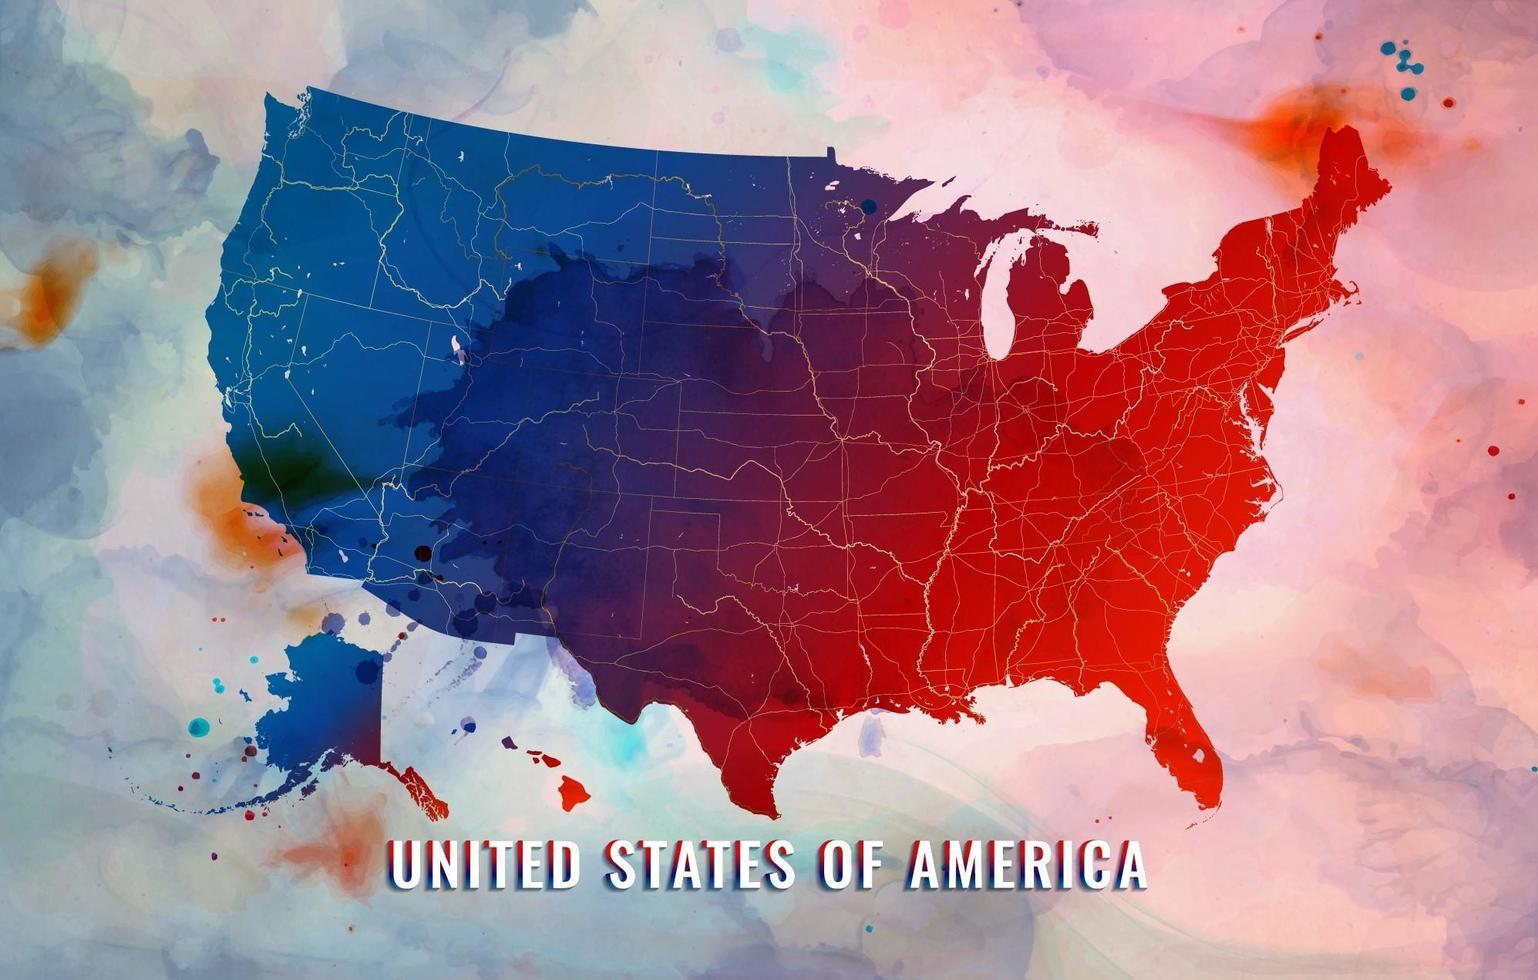 United States Of America Map in Watercolor Background vector